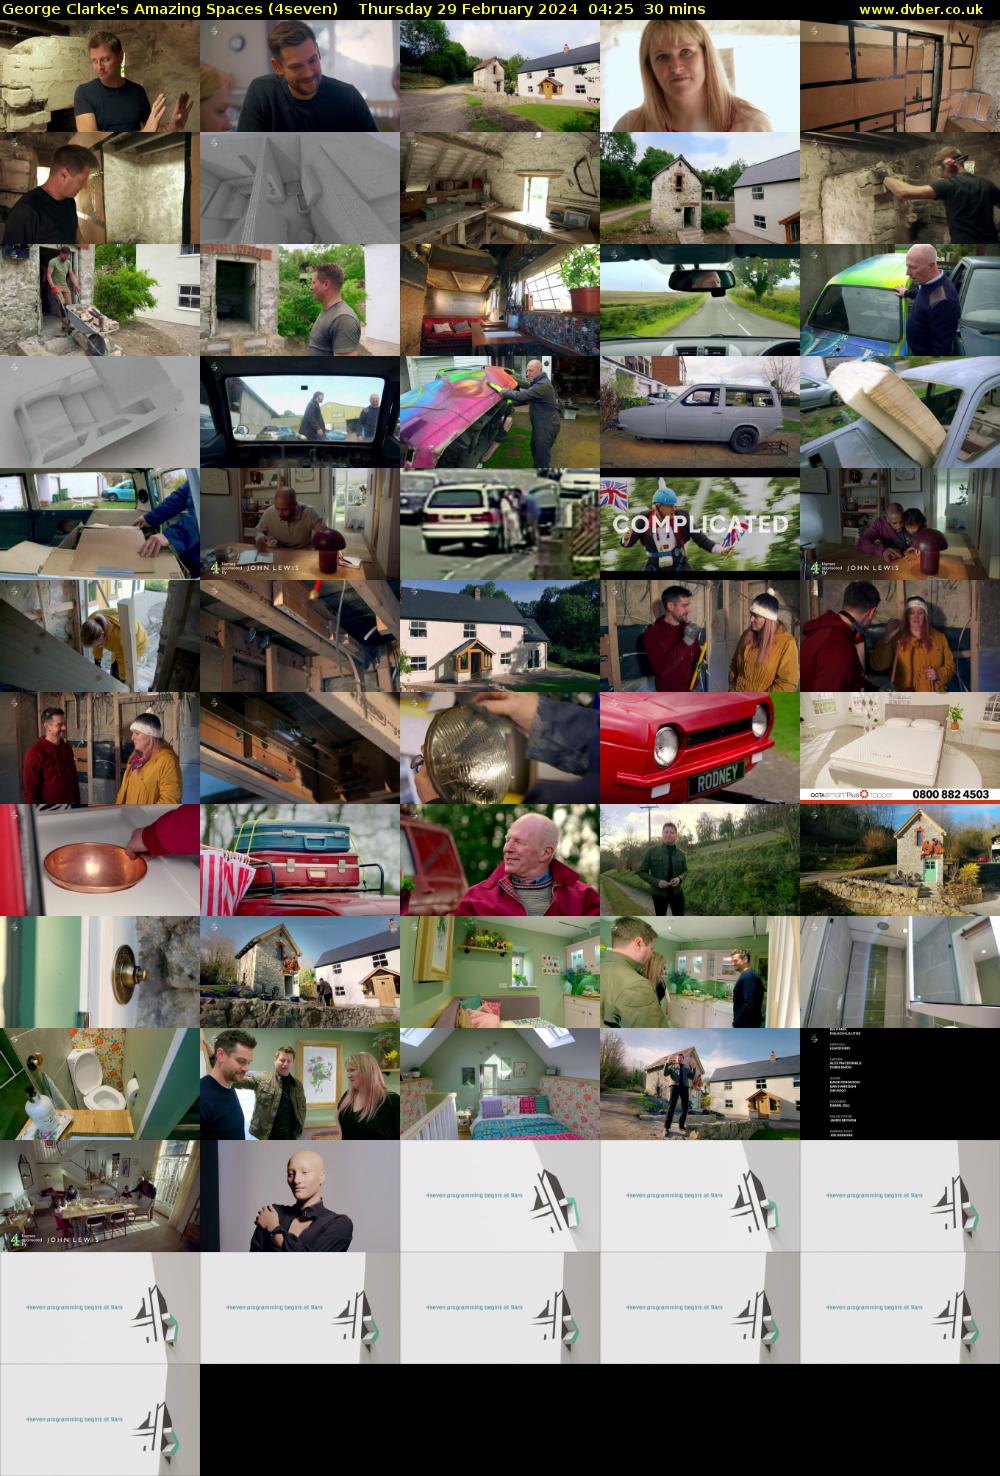 George Clarke's Amazing Spaces (4seven) Thursday 29 February 2024 04:25 - 04:55